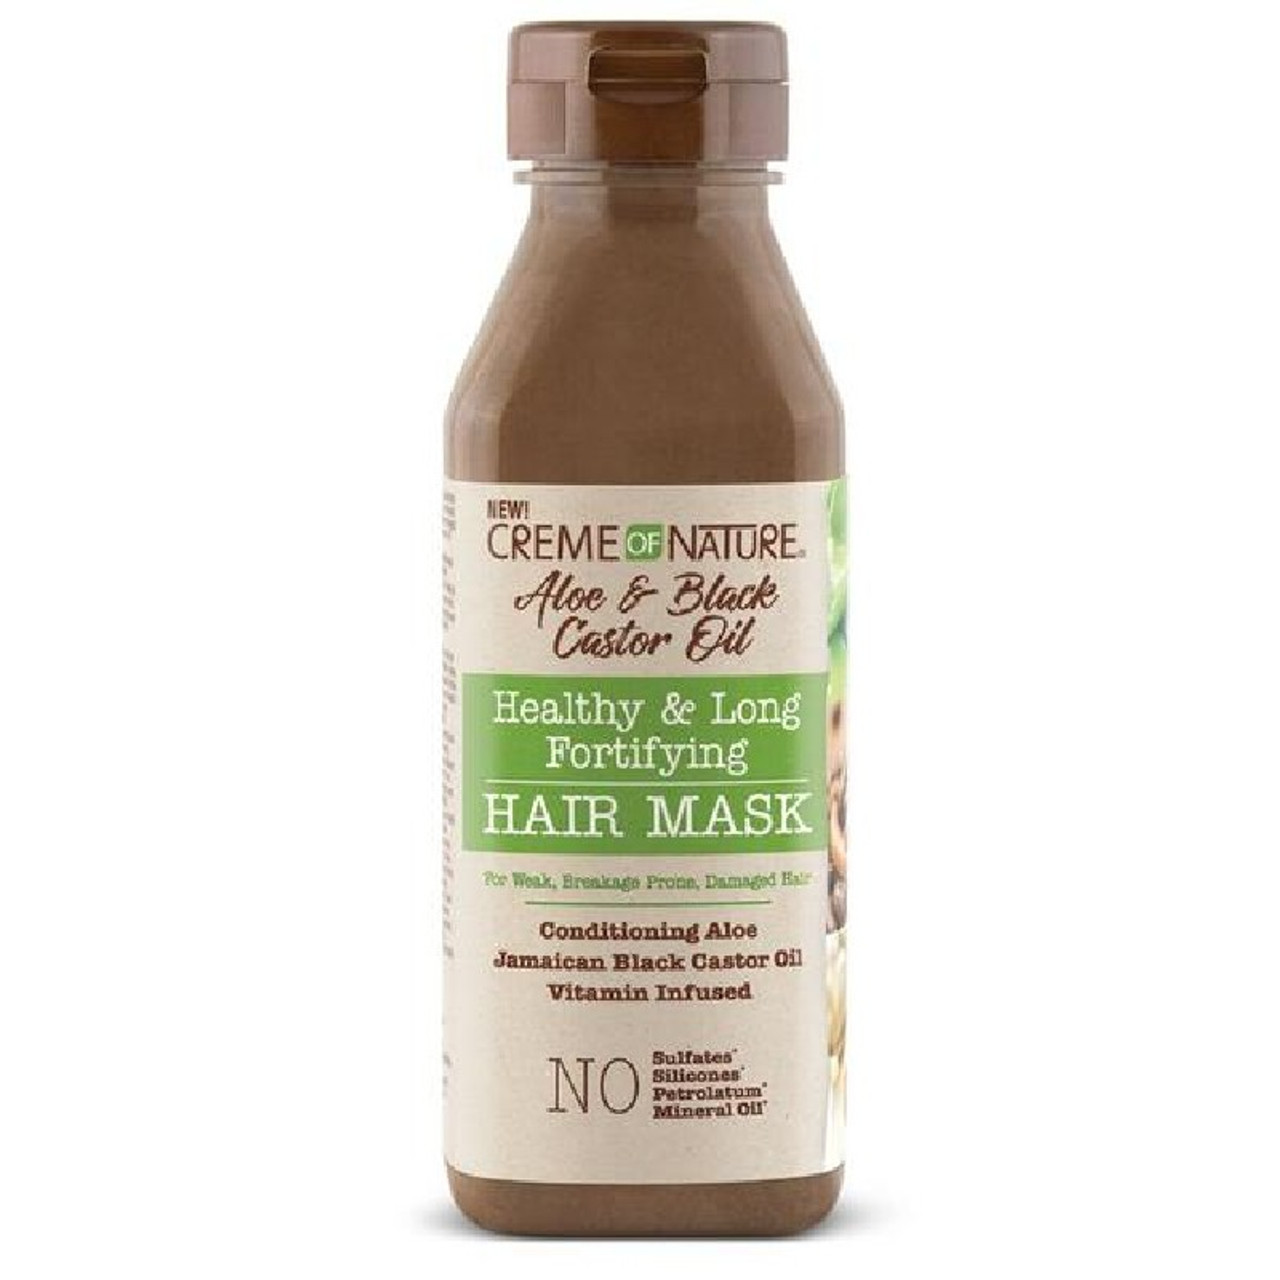 Creme of Nature Aloe & Black Castor Oil Healthy & Long Fortifying Hair Mask  (12 oz.) - NaturallyCurly